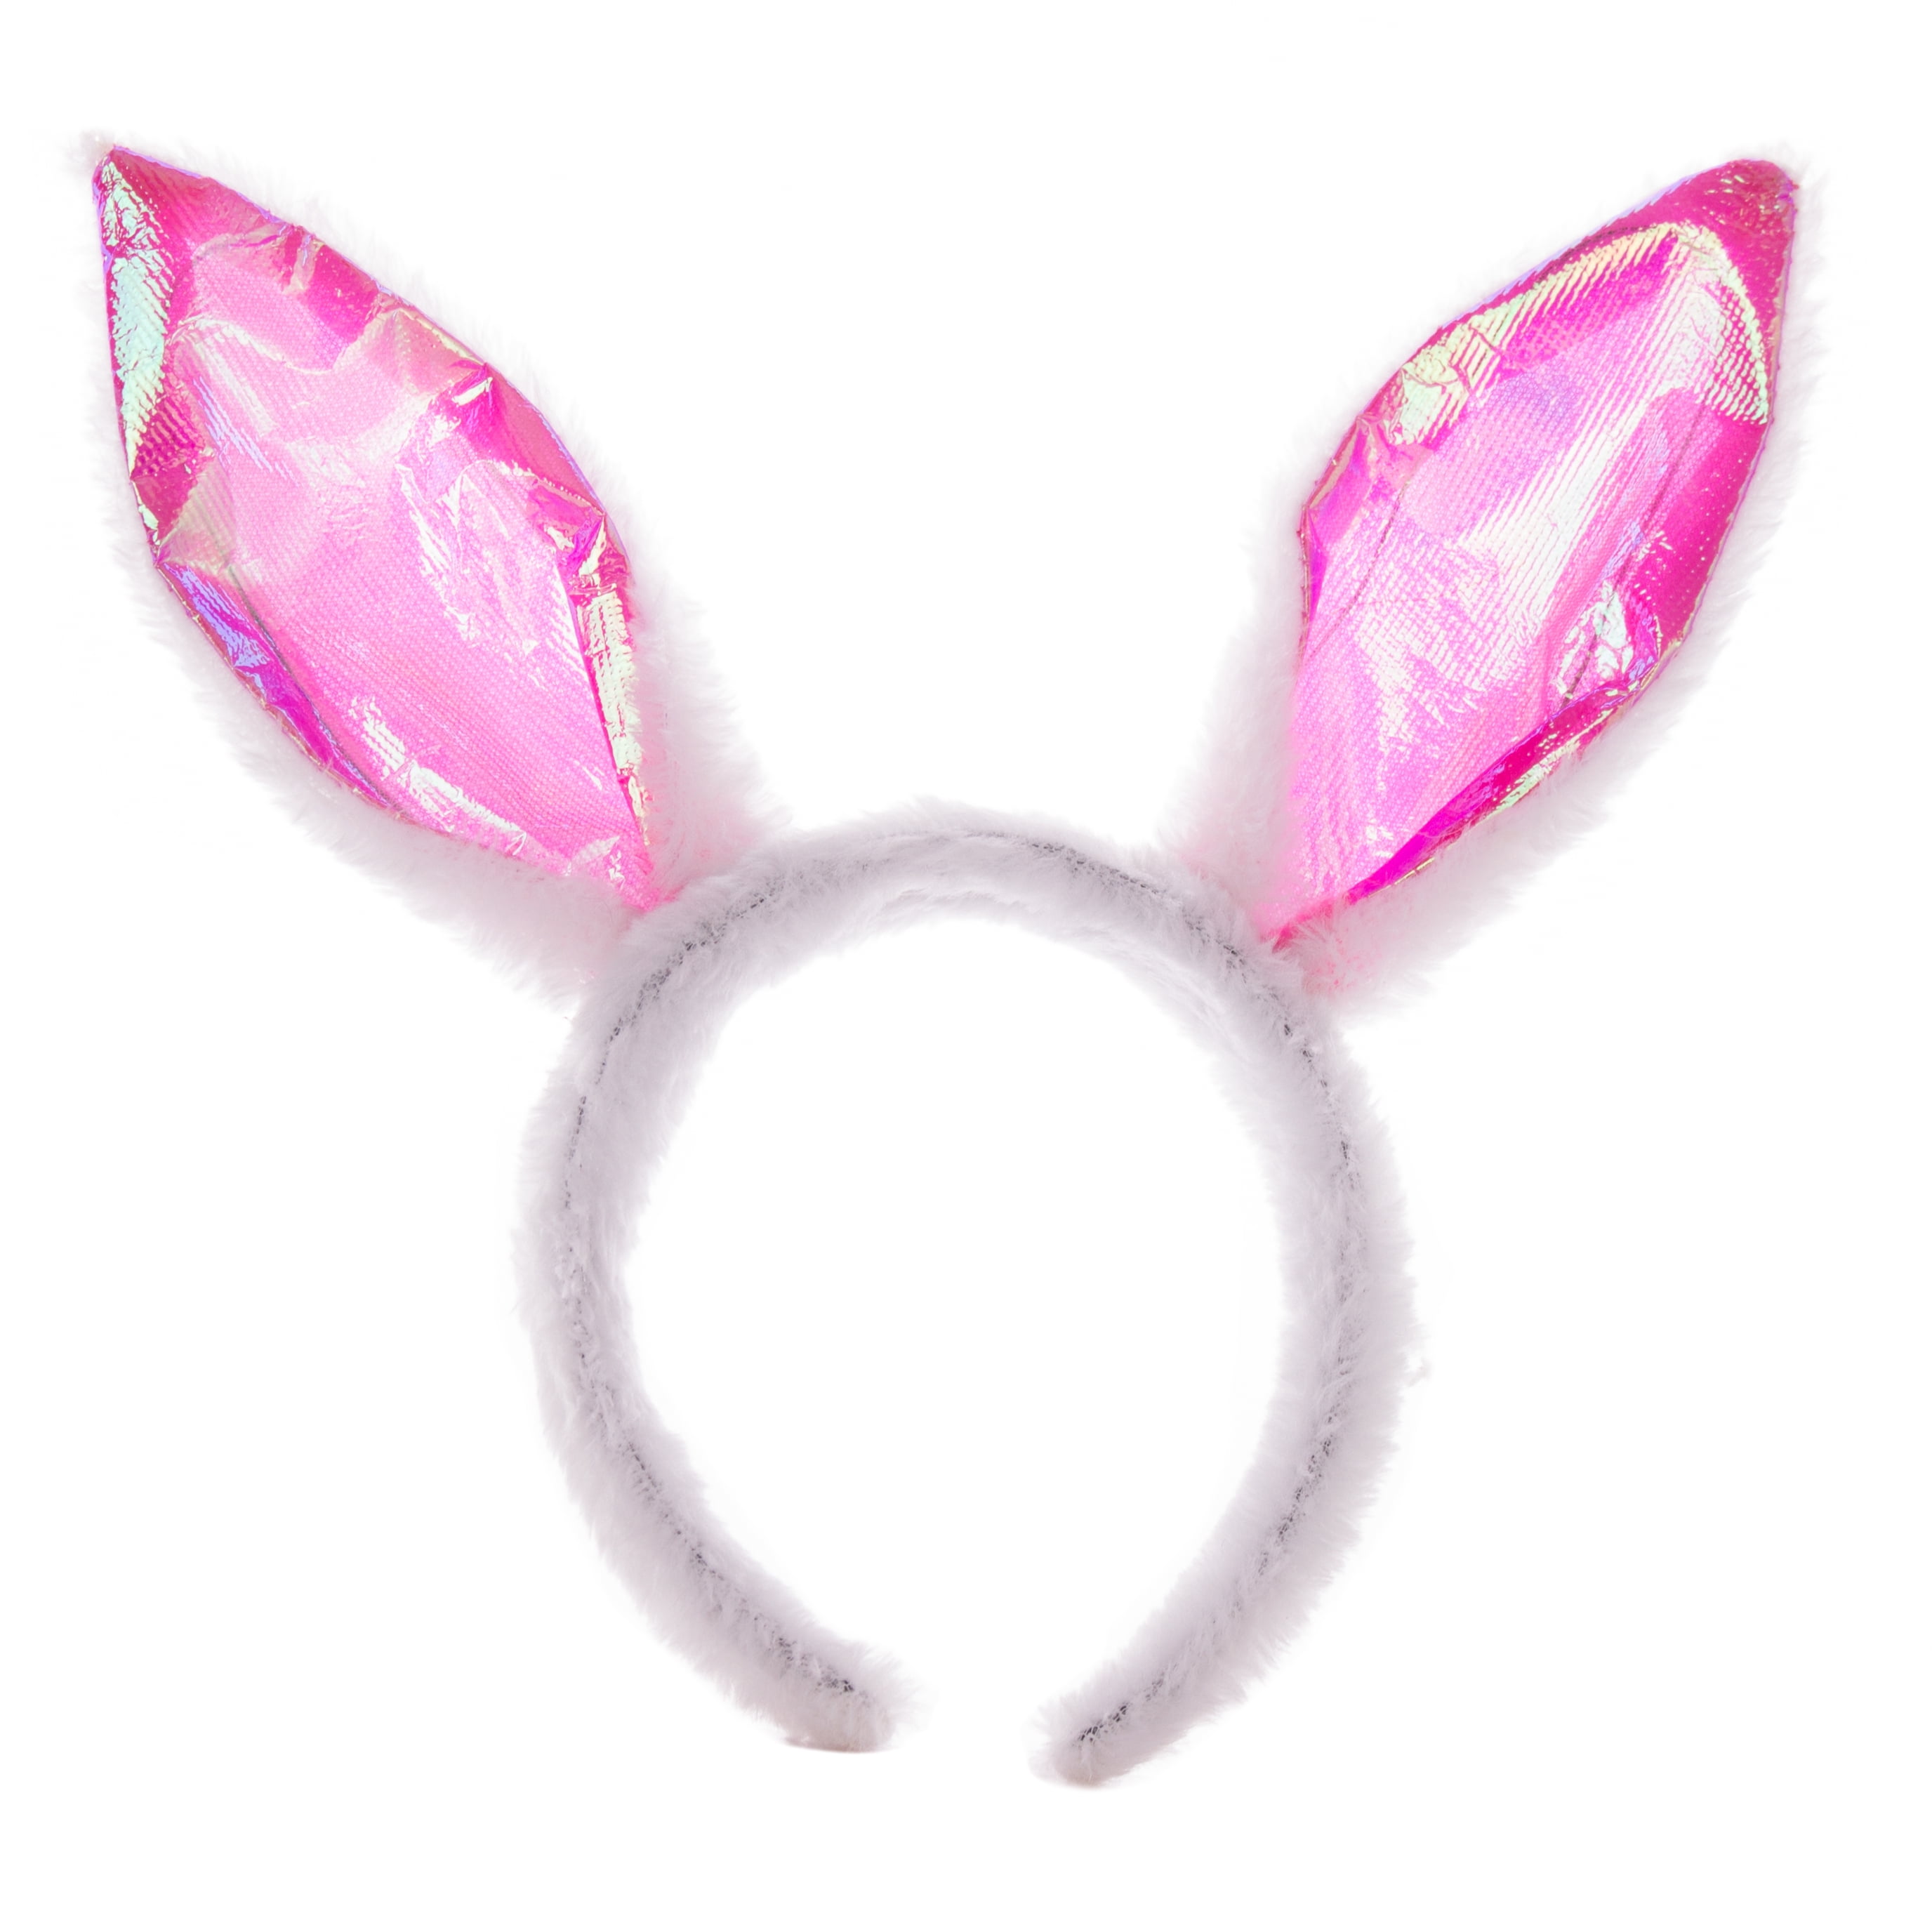 grey and white colors great for costume or Easter egg hunts Satin Bunny Ears Easter Headband set 3 pk pink